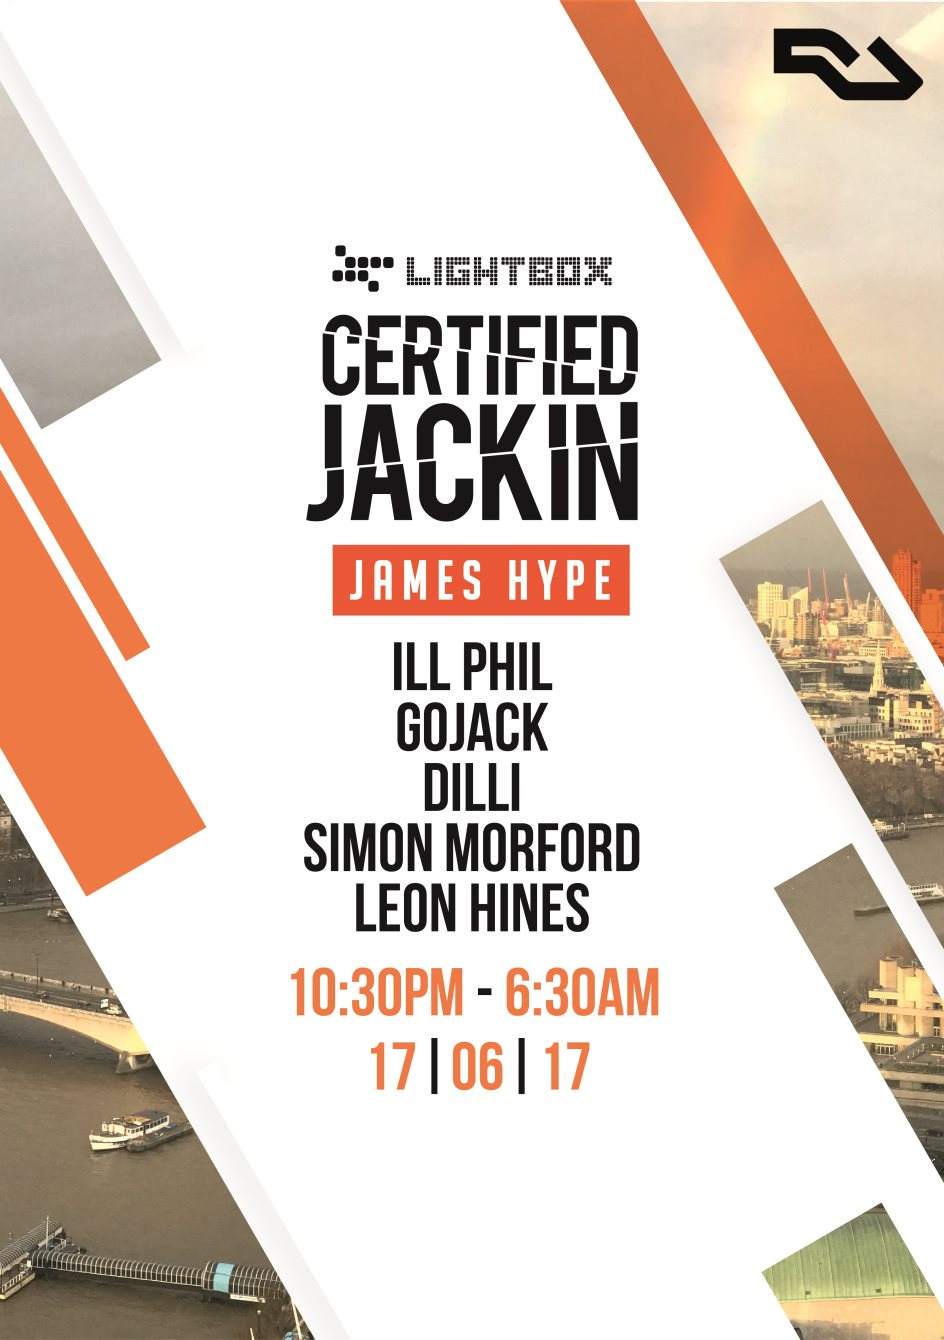 Certified Jackin with James Hype, Ill Phil, Gojack and Many More - フライヤー表